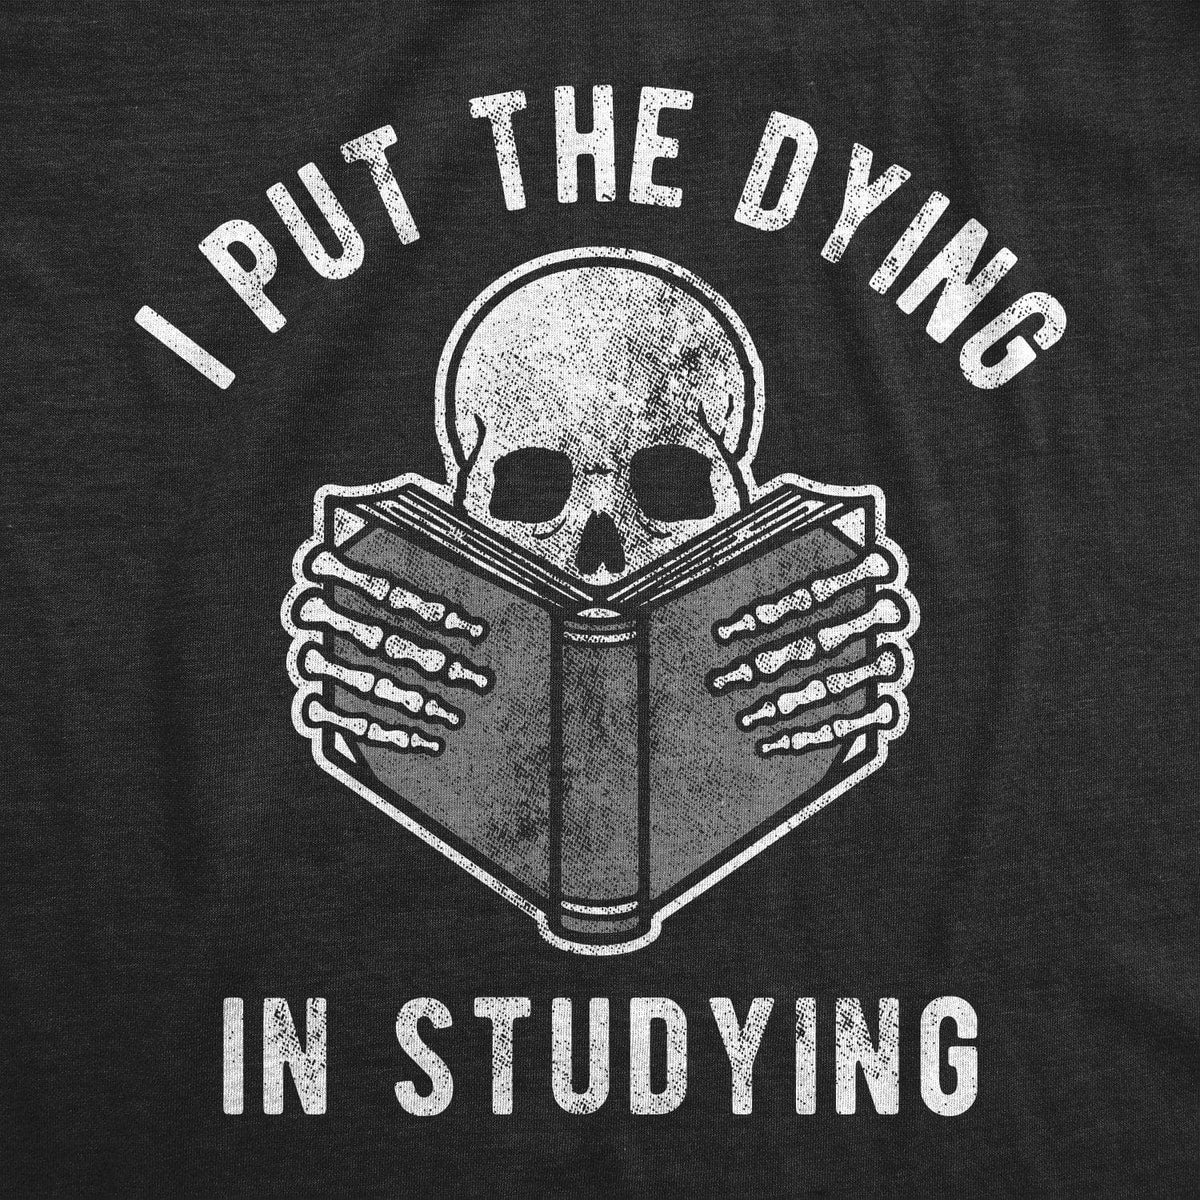 I Put The Dying In Studying Men&#39;s Tshirt - Crazy Dog T-Shirts